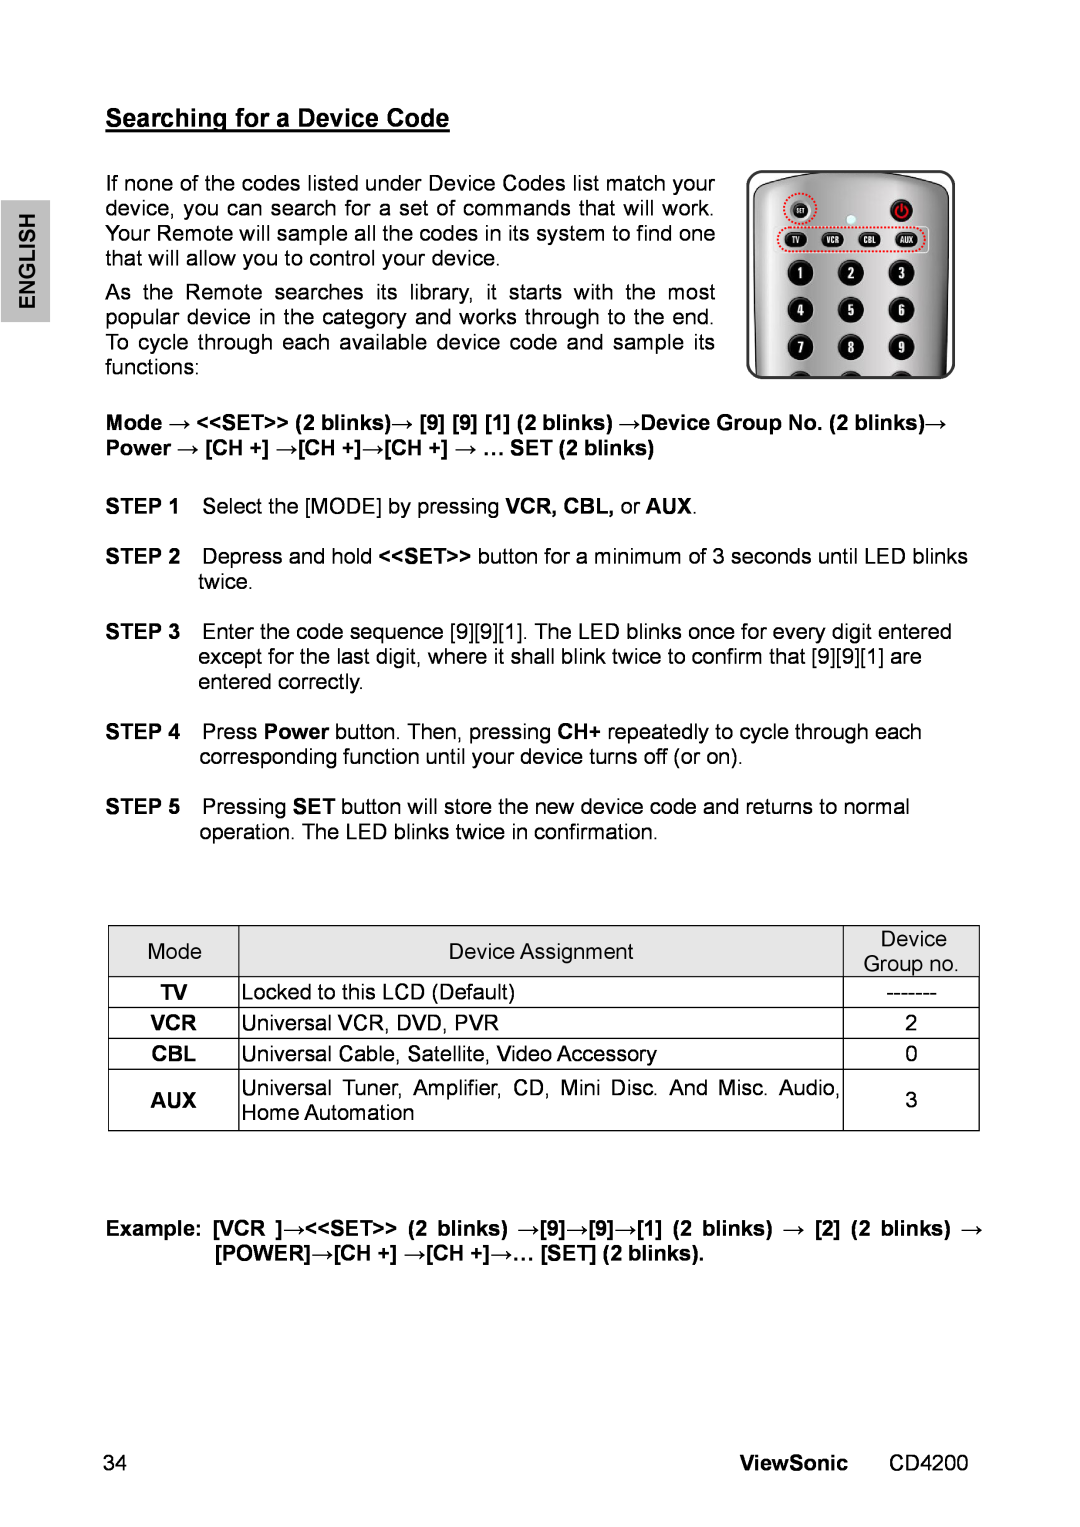 ViewSonic CD4200 manual Searching for a Device Code, English, ViewSonic 